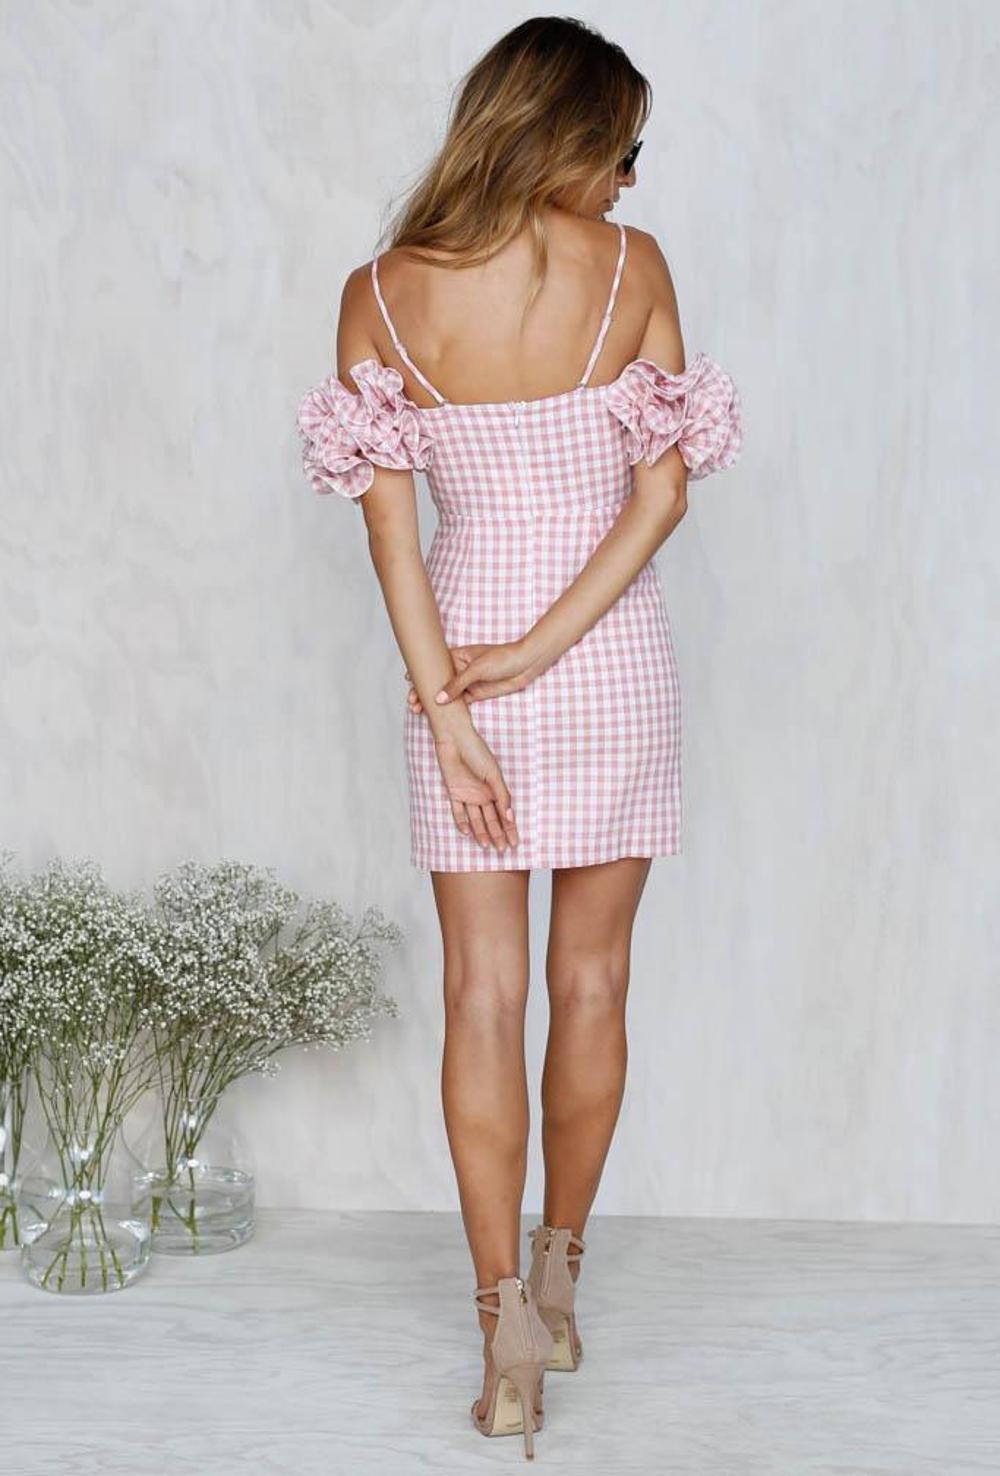 Wholesale 2018 New Arrivals Clothing Ruffled Sleeve Pink Gingham Women Dresses Summer from china suppliers